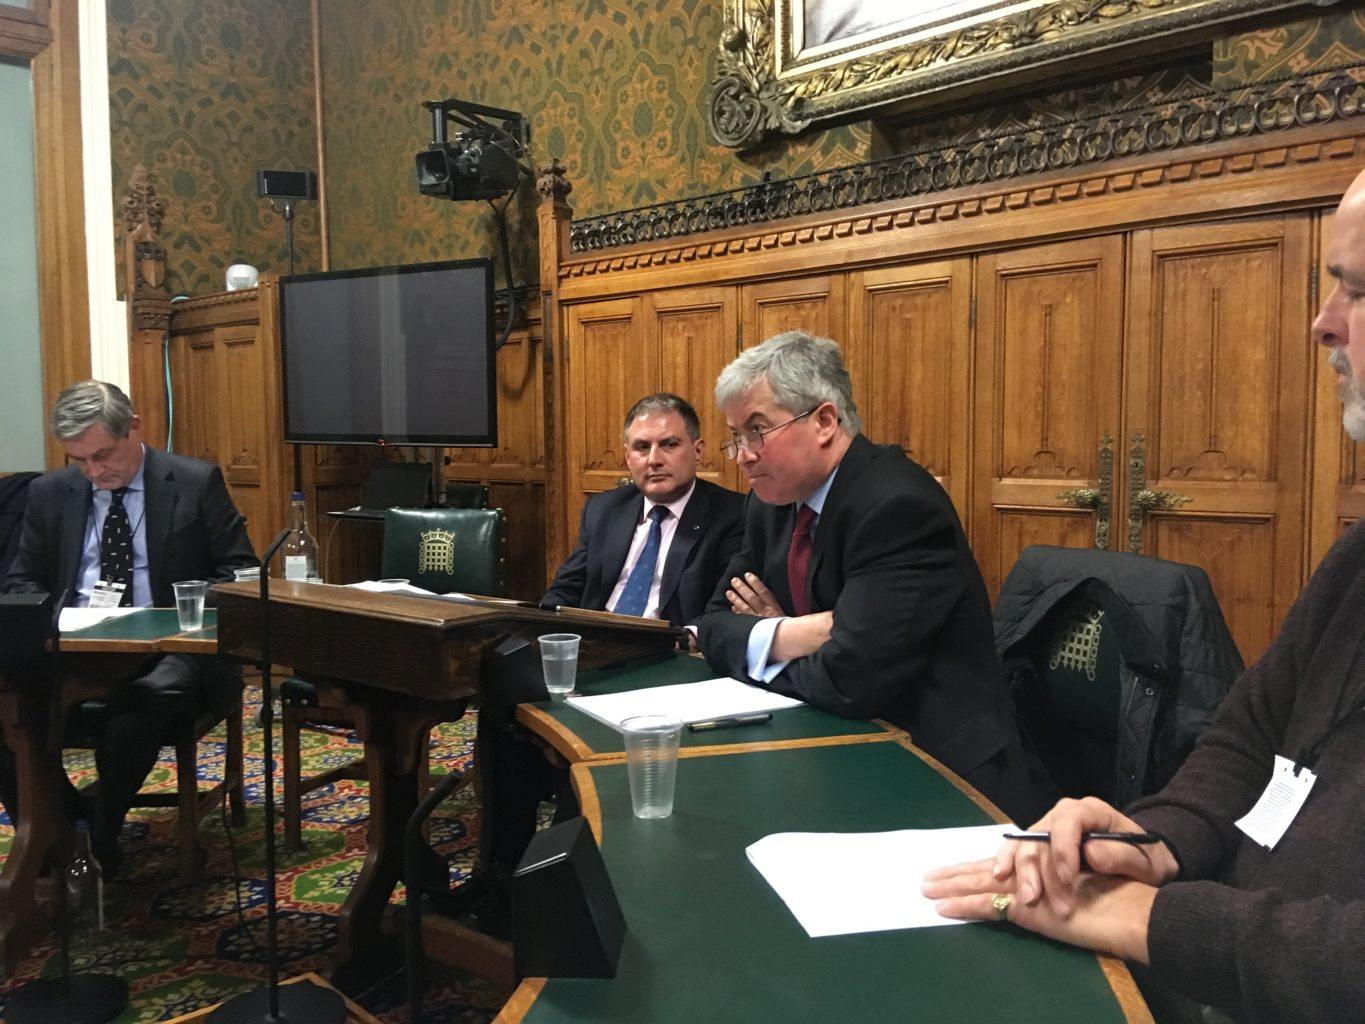 Hosted by Jack Lopresti MP, the event was entitled ‘Russian Foreign Policy: Threats and Scenarios’. It brought together Professor Christopher Coker from the Department of International Relations at the London School of Economics and retired General Sir Ri